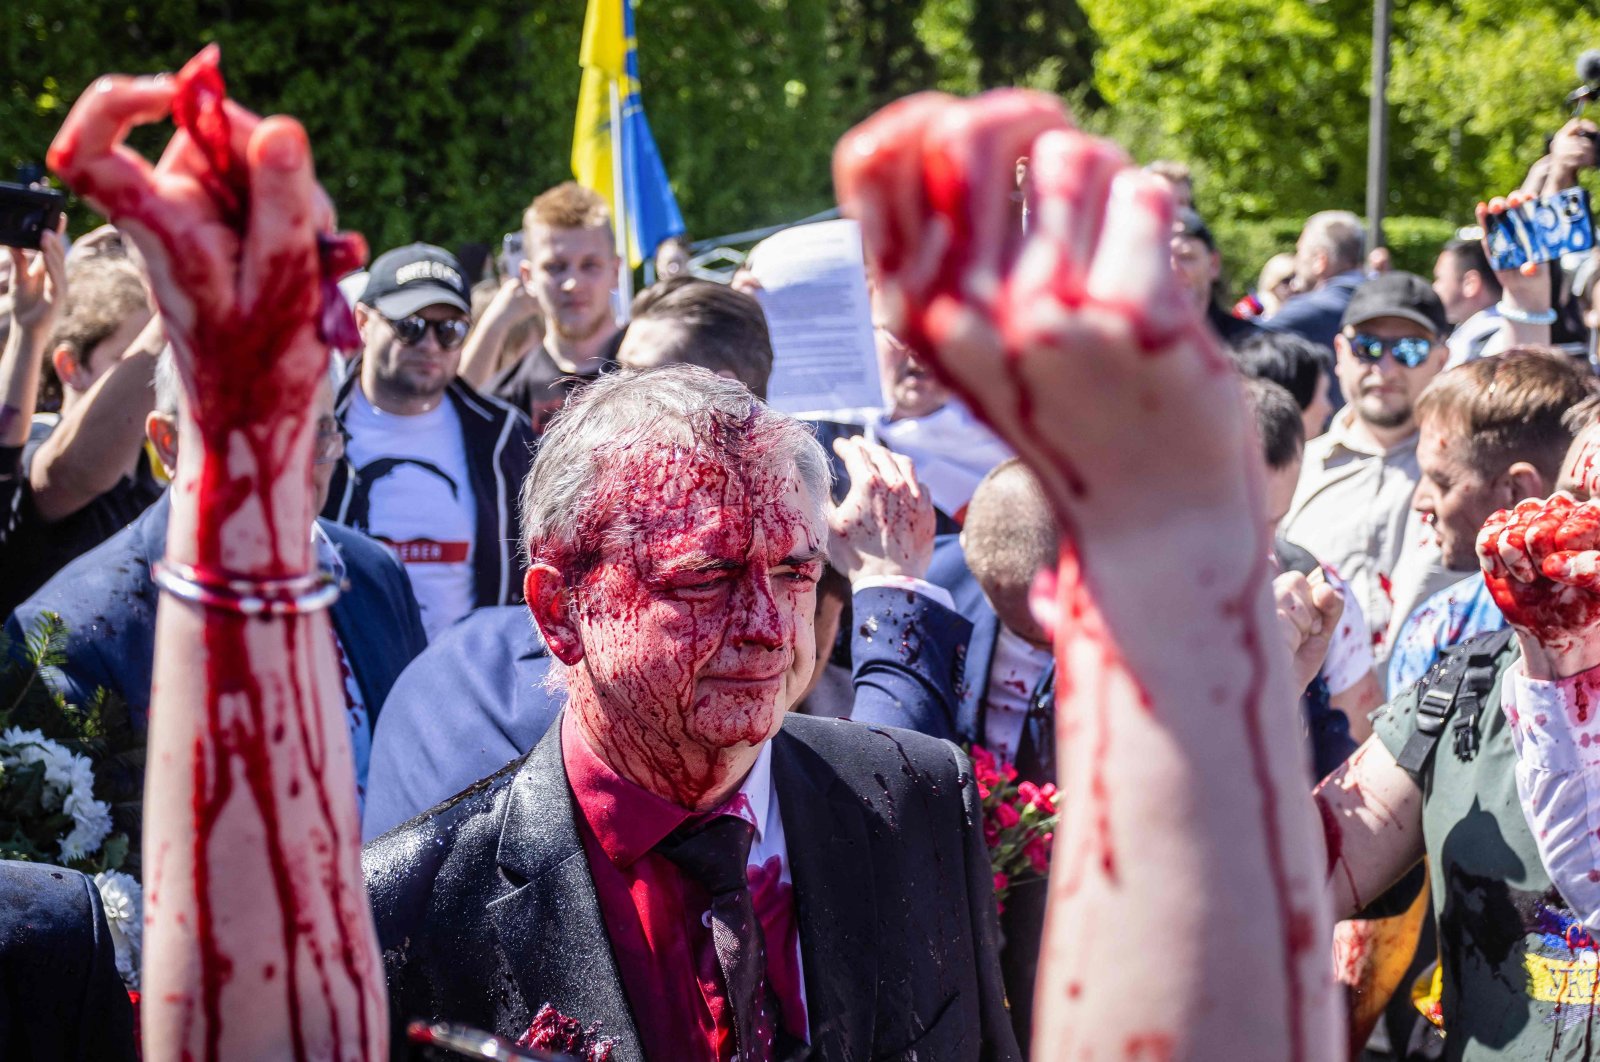 Russian Ambassador to Poland, Ambassador Sergey Andreev reacts after being covered with red paint during a rally for peace in Ukraine in Warsaw, Poland, May 9, 2022. (AFP Photo)